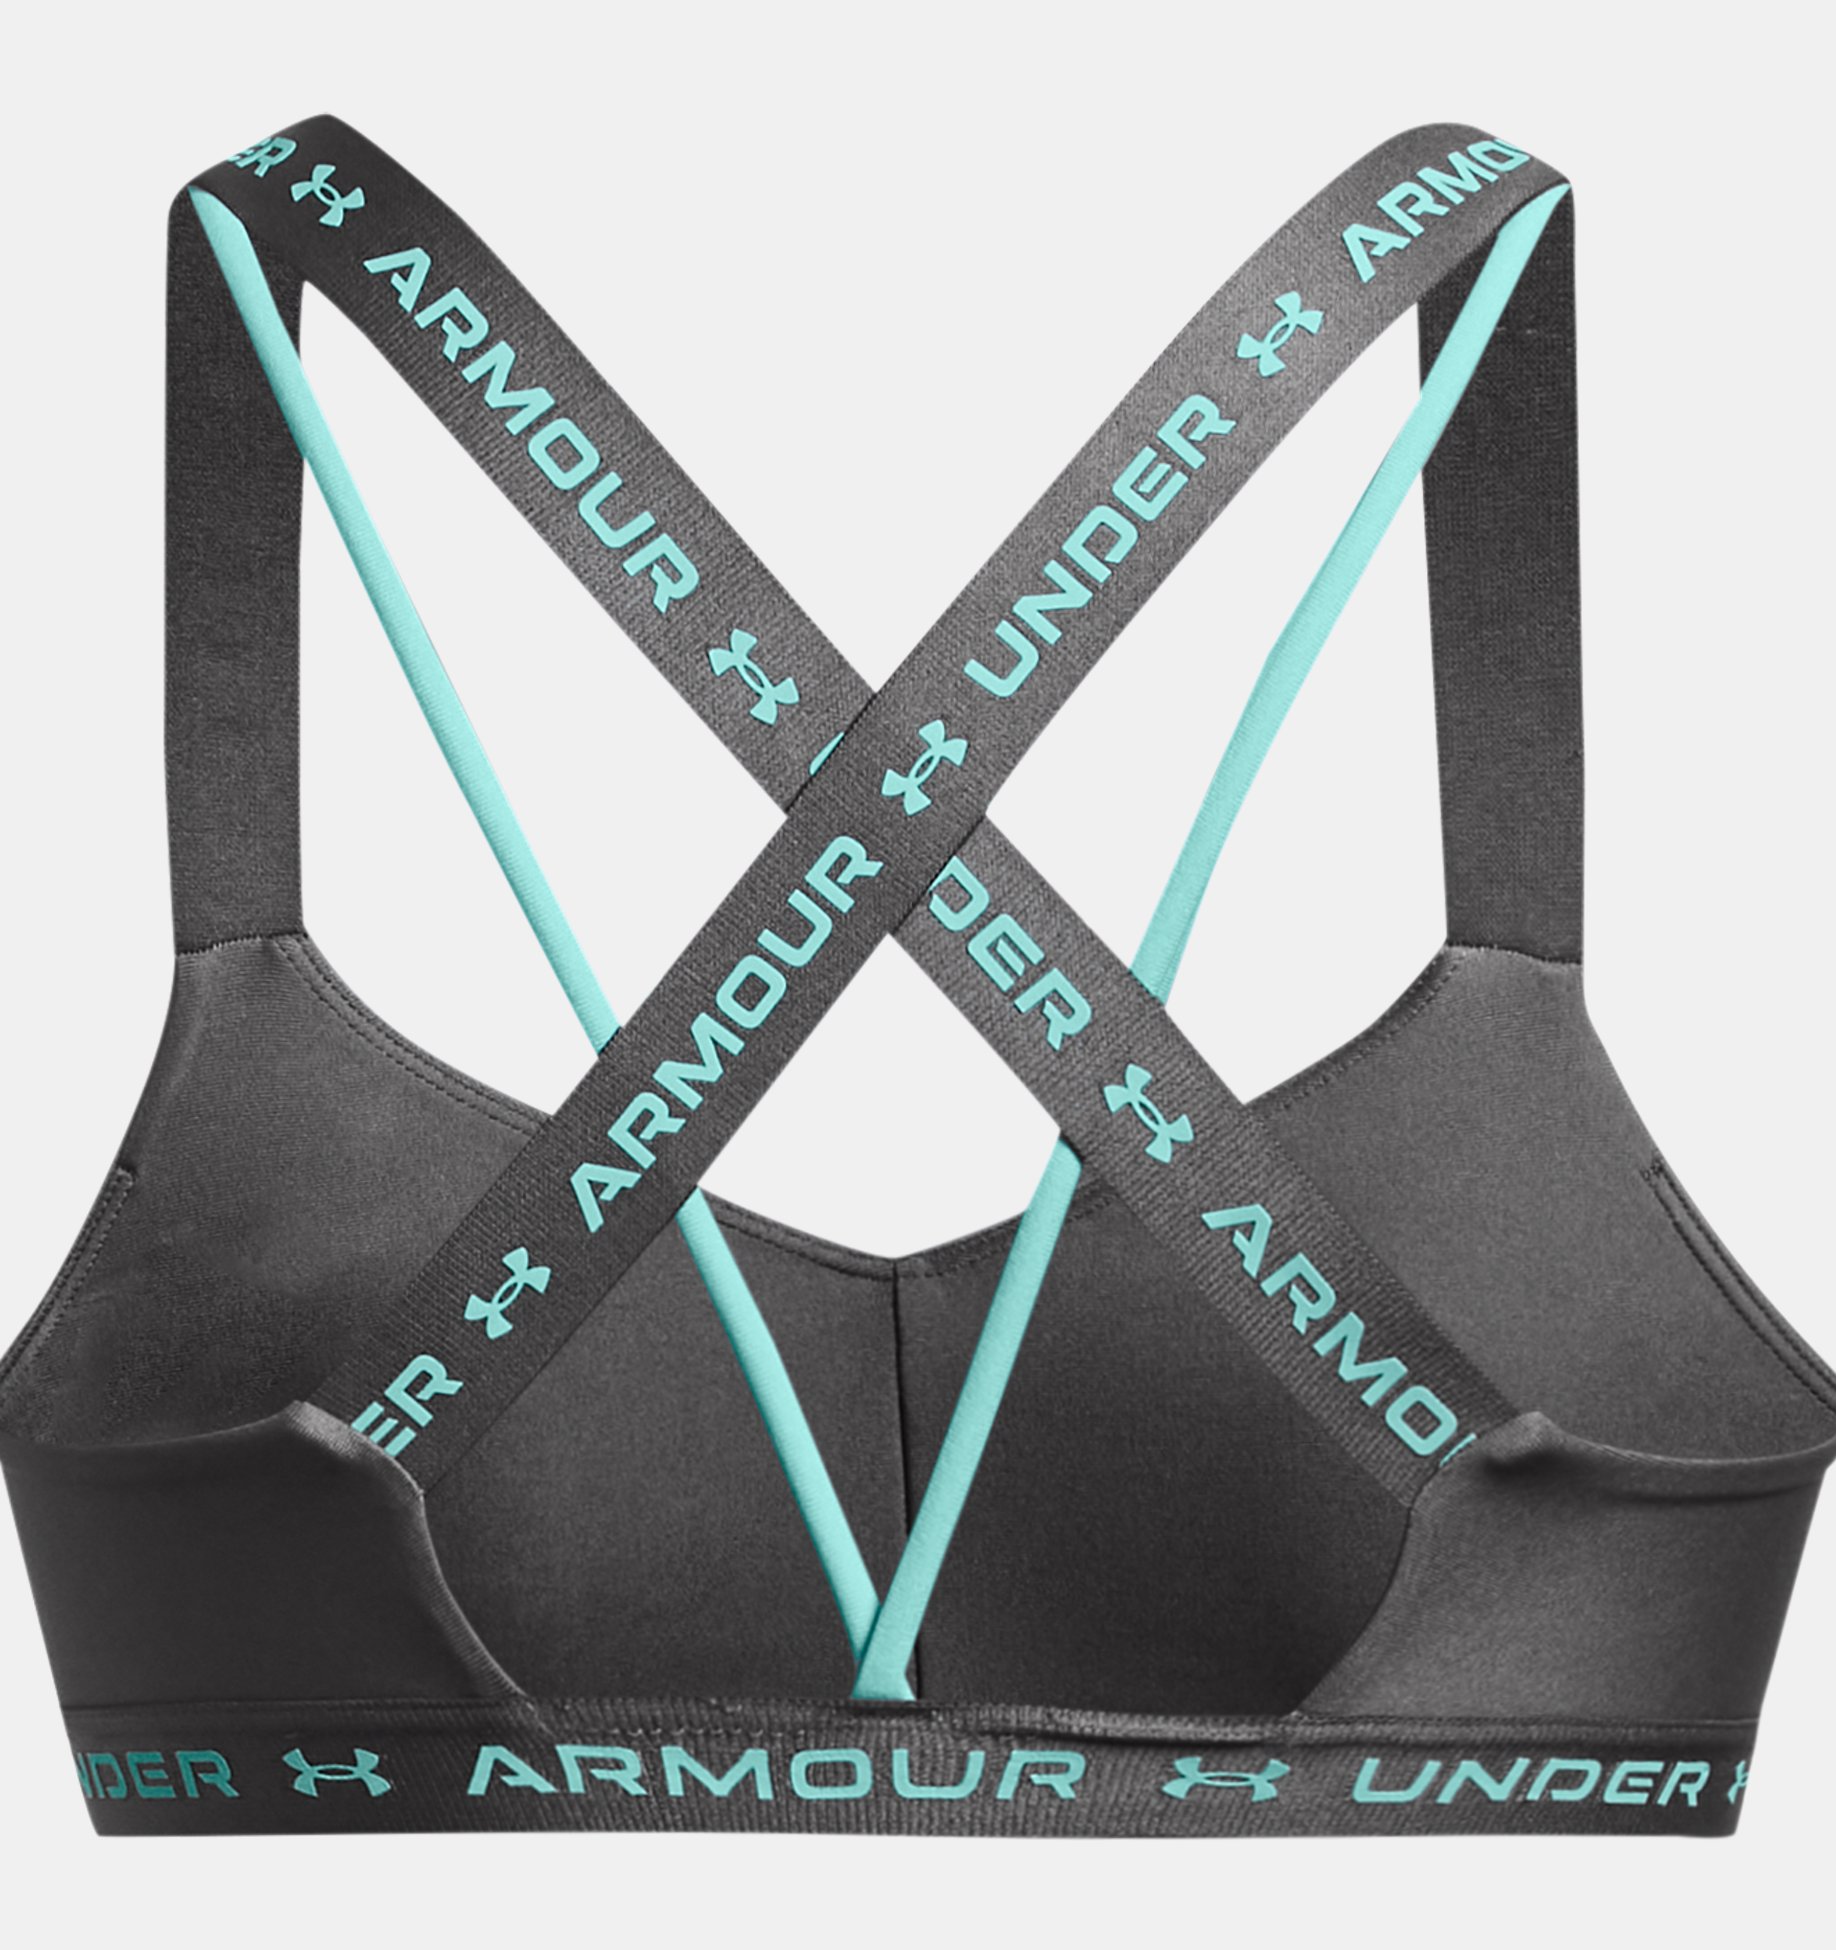 https://underarmour.scene7.com/is/image/Underarmour/PS1361033-025_HB?rp=standard-0pad|pdpZoomDesktop&scl=0.72&fmt=jpg&qlt=85&resMode=sharp2&cache=on,on&bgc=f0f0f0&wid=1836&hei=1950&size=1500,1500